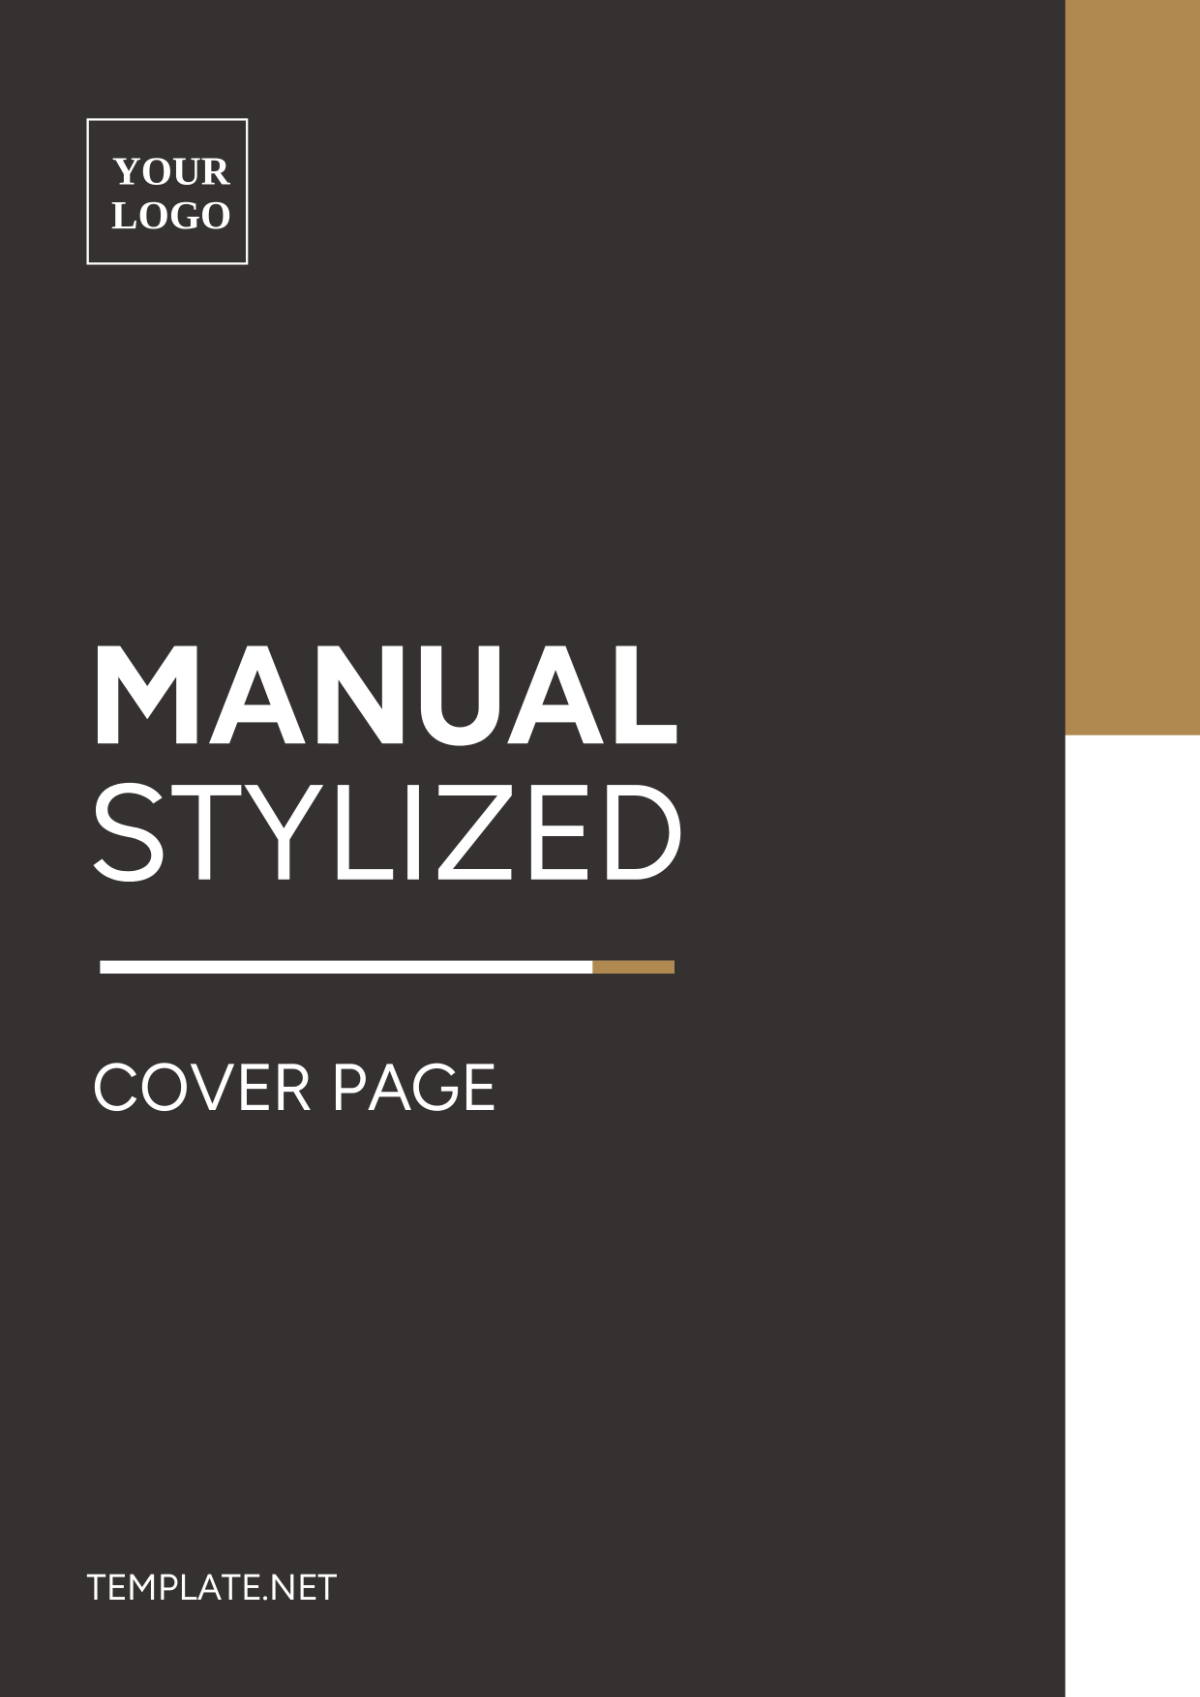 Manual Stylized Cover Page Template